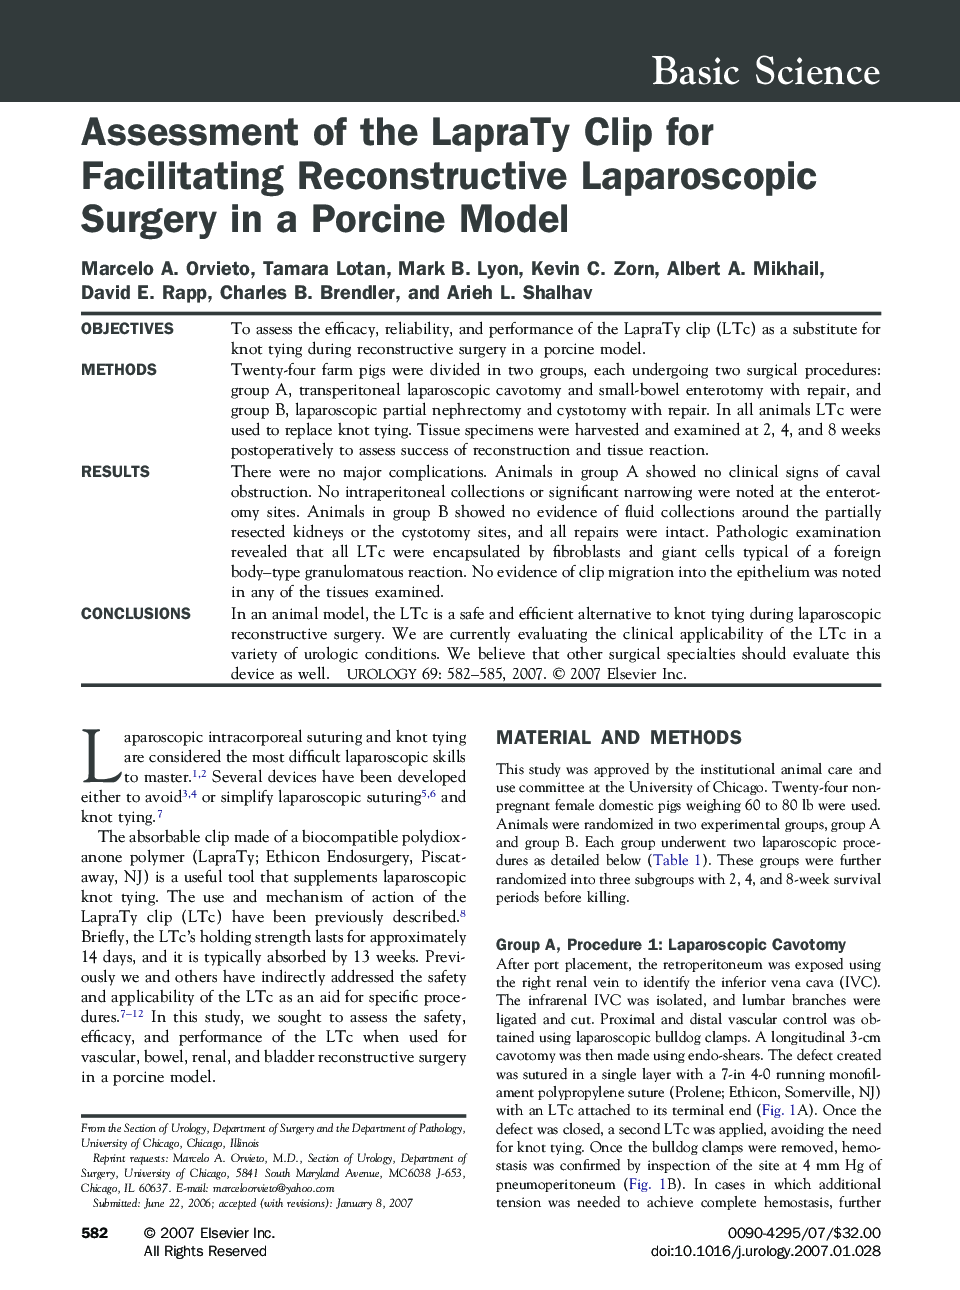 Assessment of the LapraTy Clip for Facilitating Reconstructive Laparoscopic Surgery in a Porcine Model